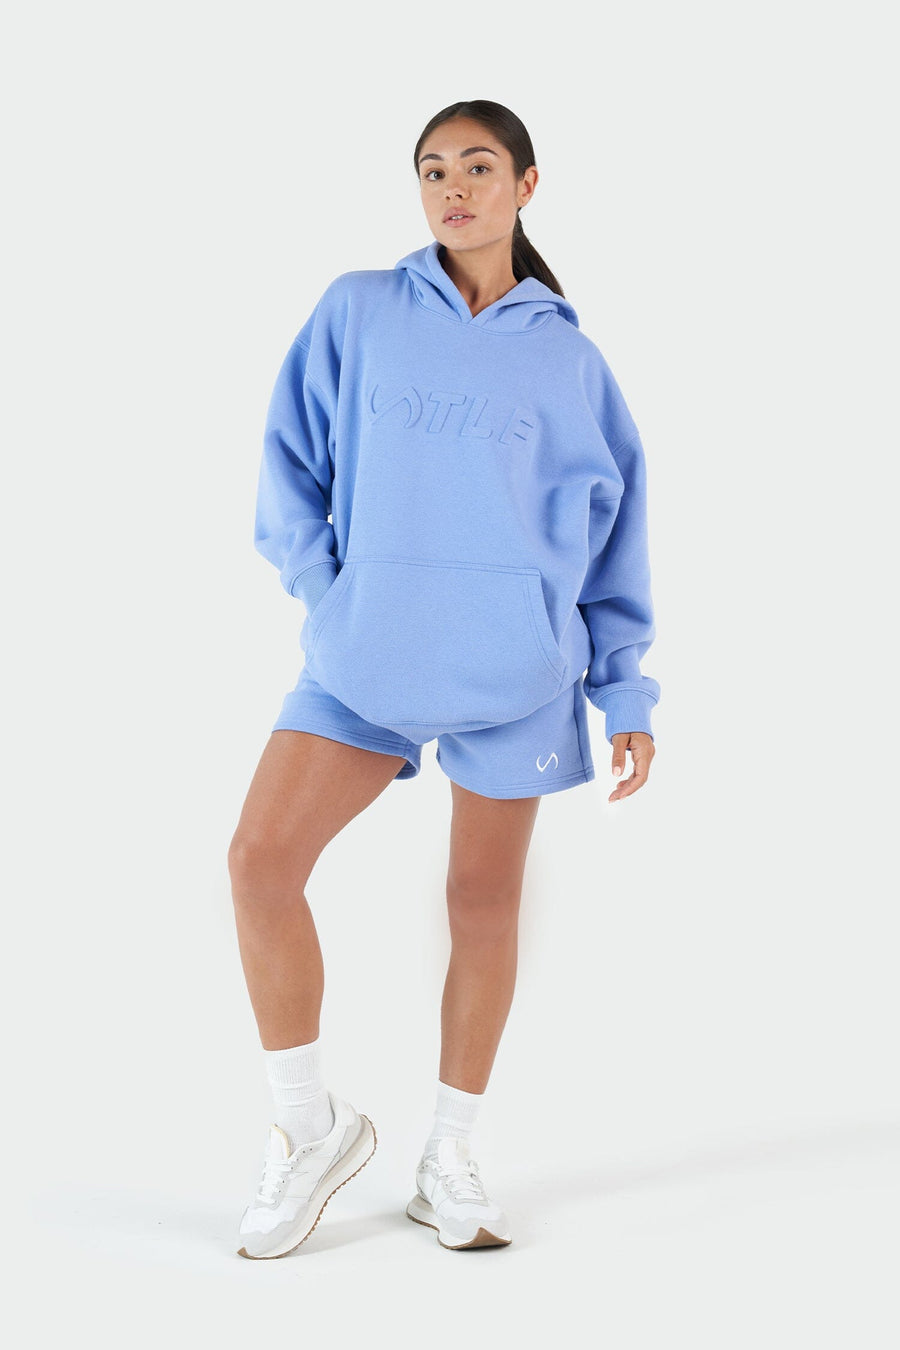 Girl Wearing Periwinkle Hoodie and Shorts